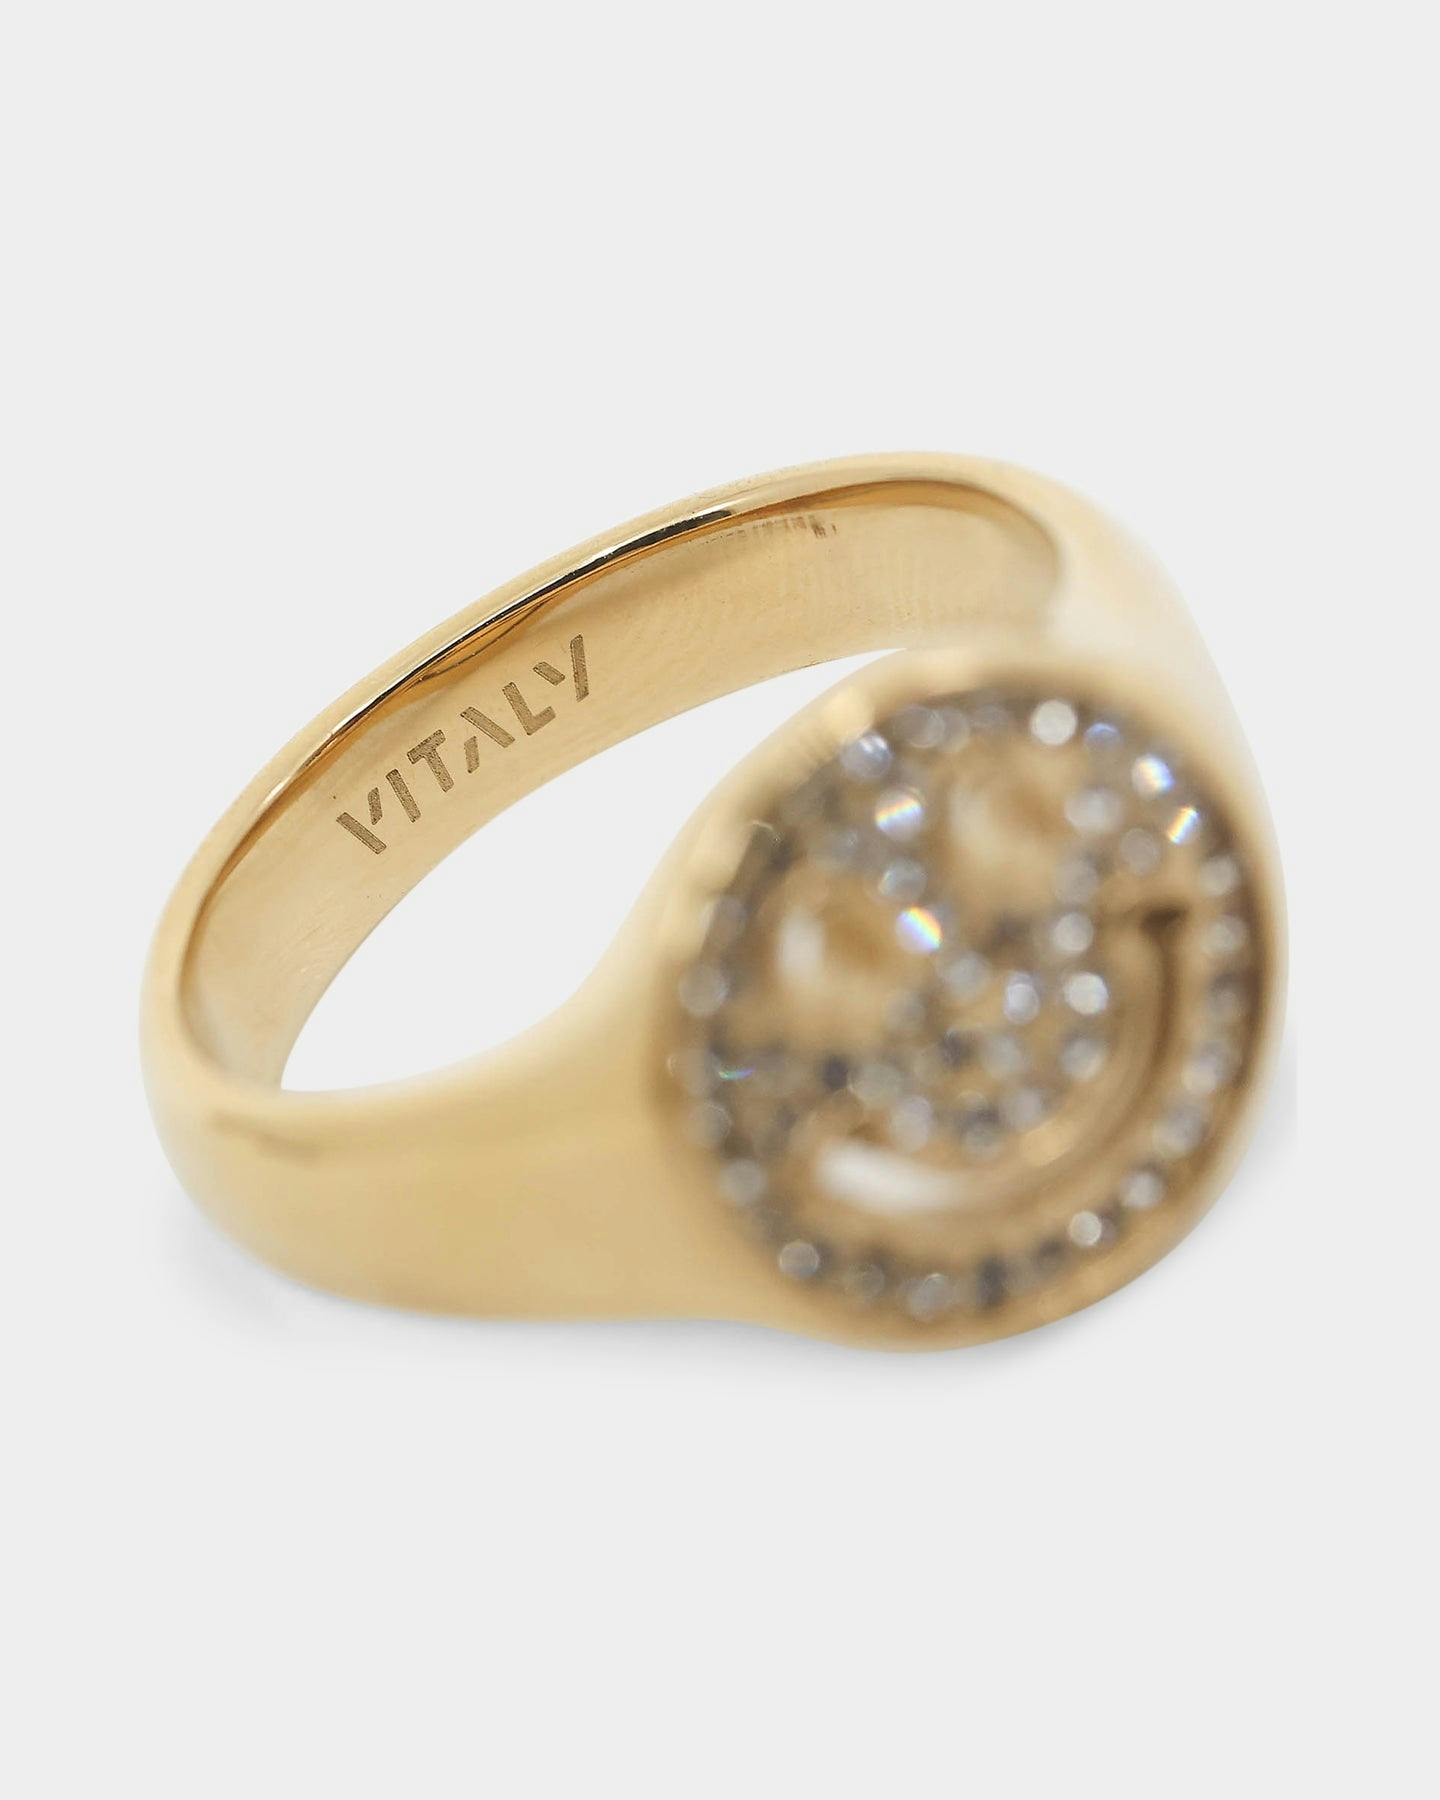 Vitaly Unisex Beam Ring Gold | Culture Kings NZ